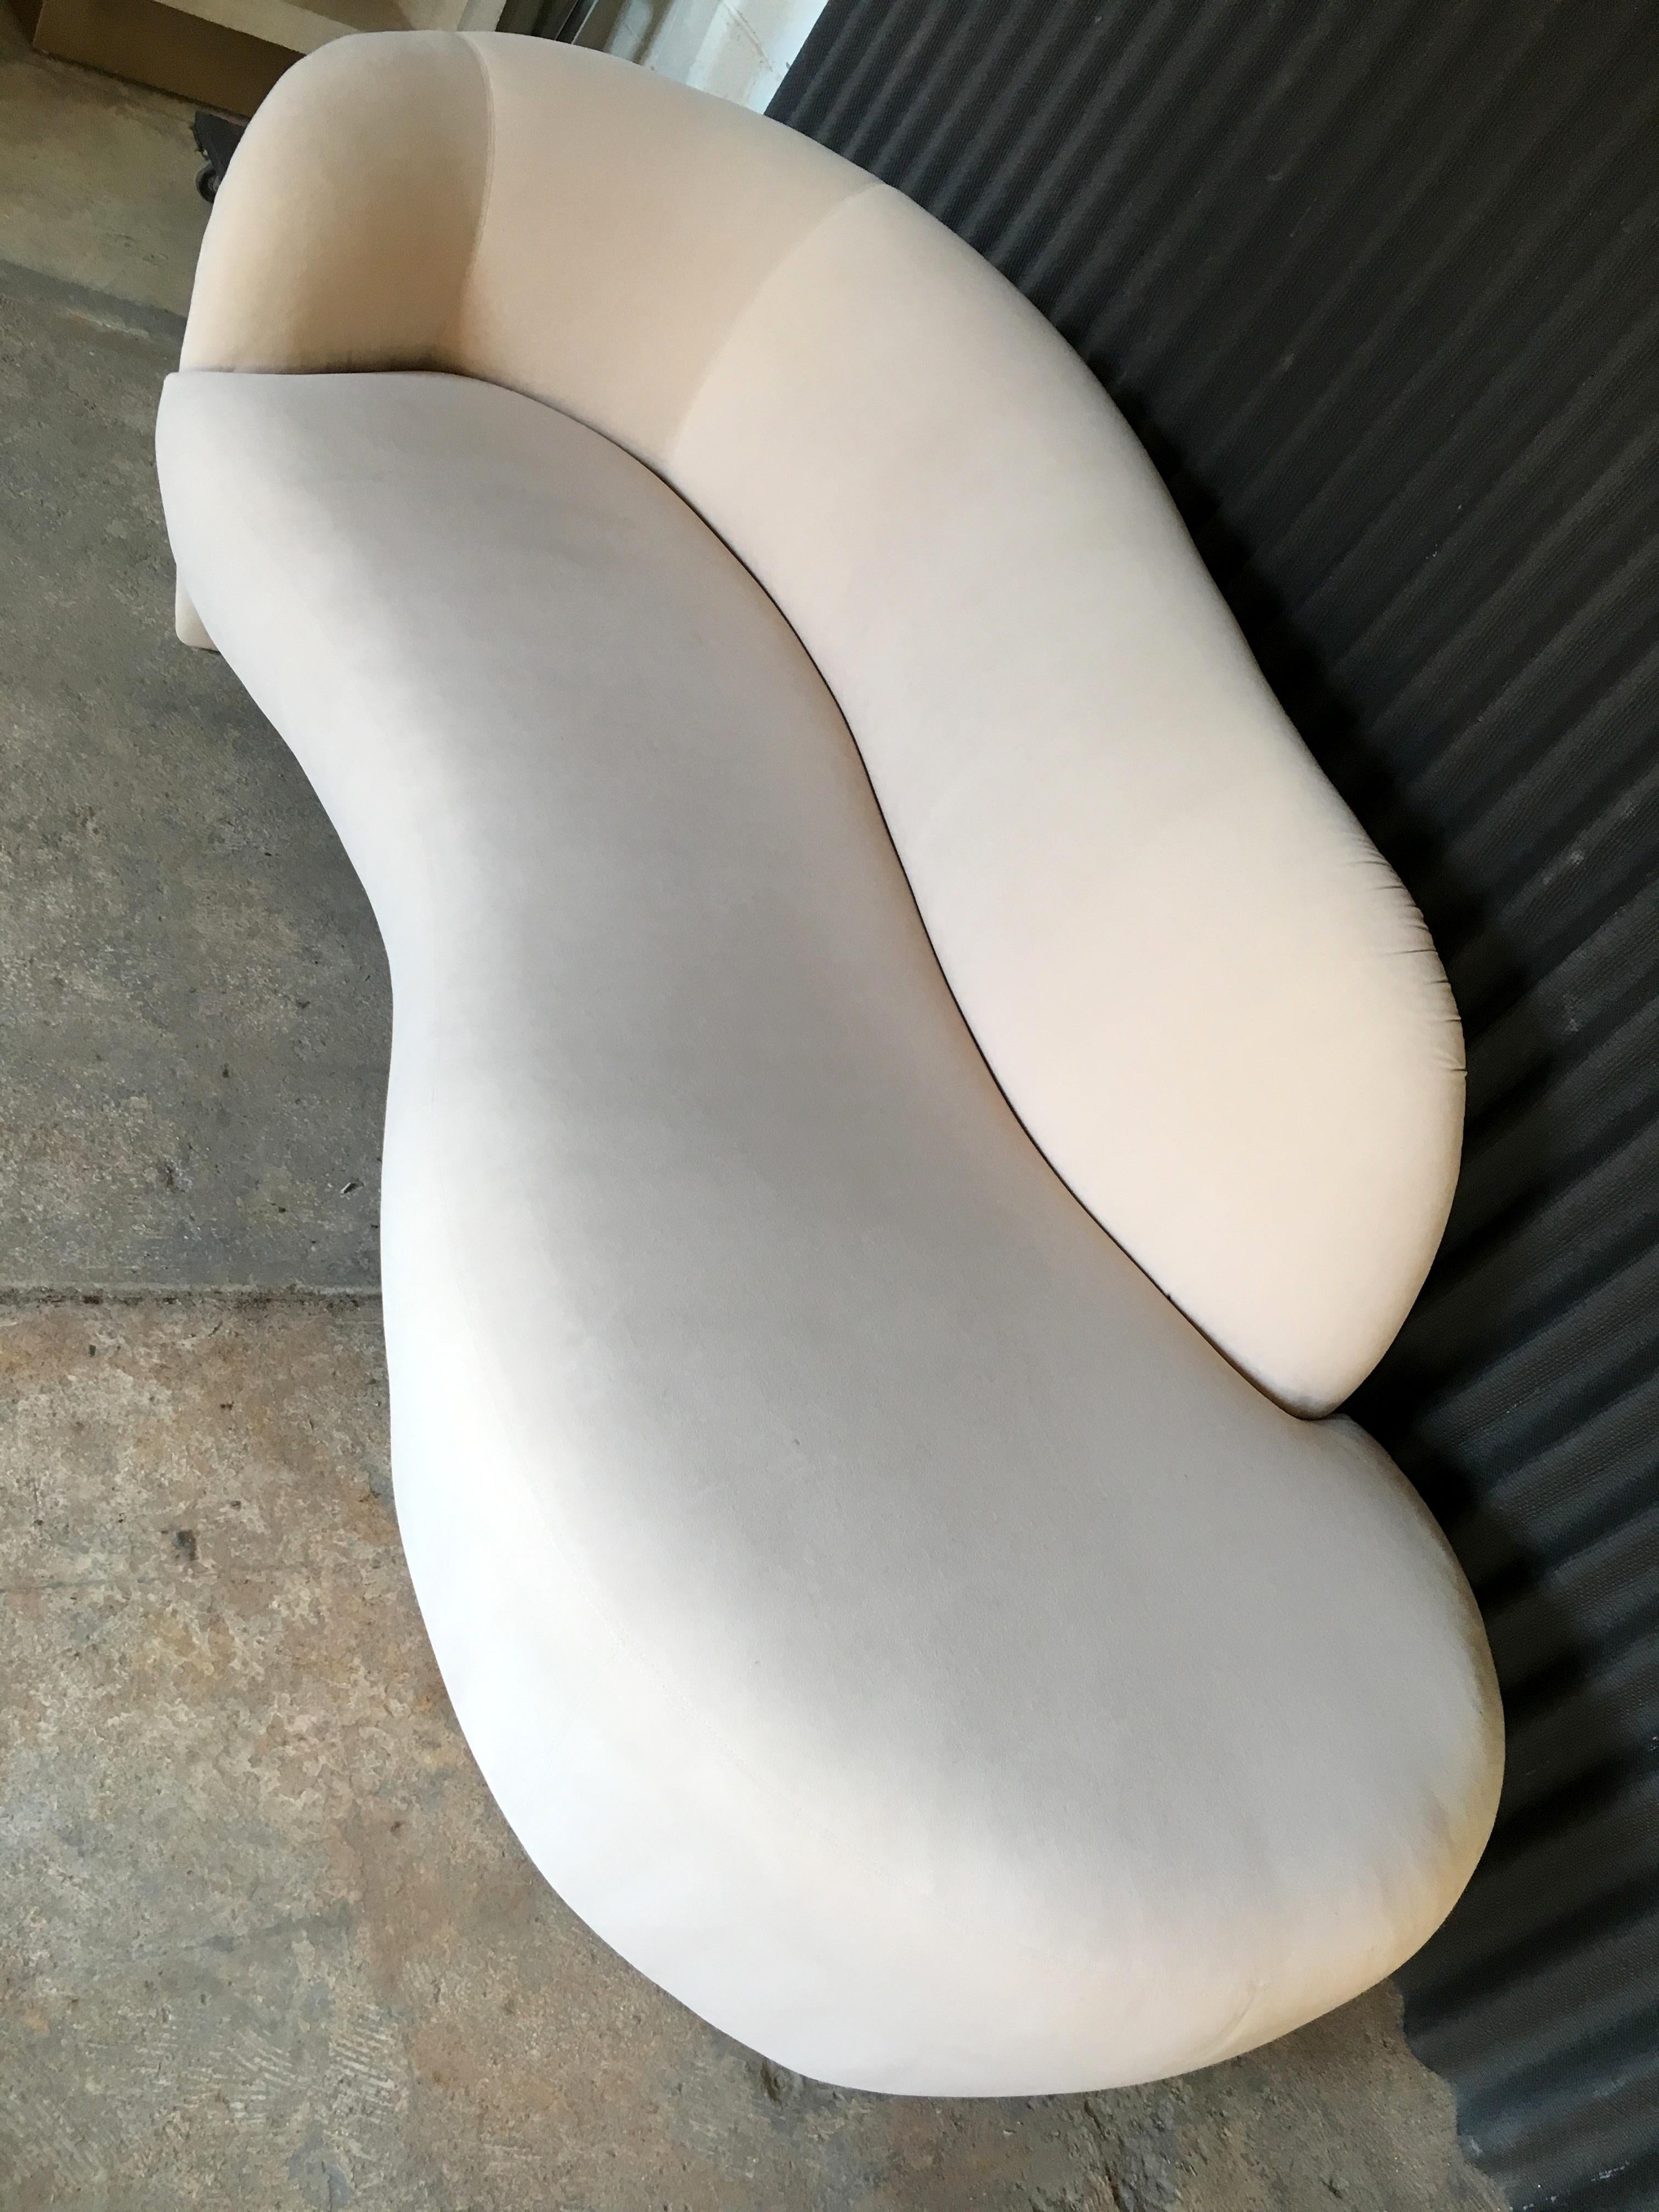 Immaculate chaise lounge sofa by Vladimir Kagan.
We just had this piece professional cleaned and it came out Amazingly!
Off white fabric makes it so easy to place it anywhere.
Beautiful lines with glorious fabric!

94